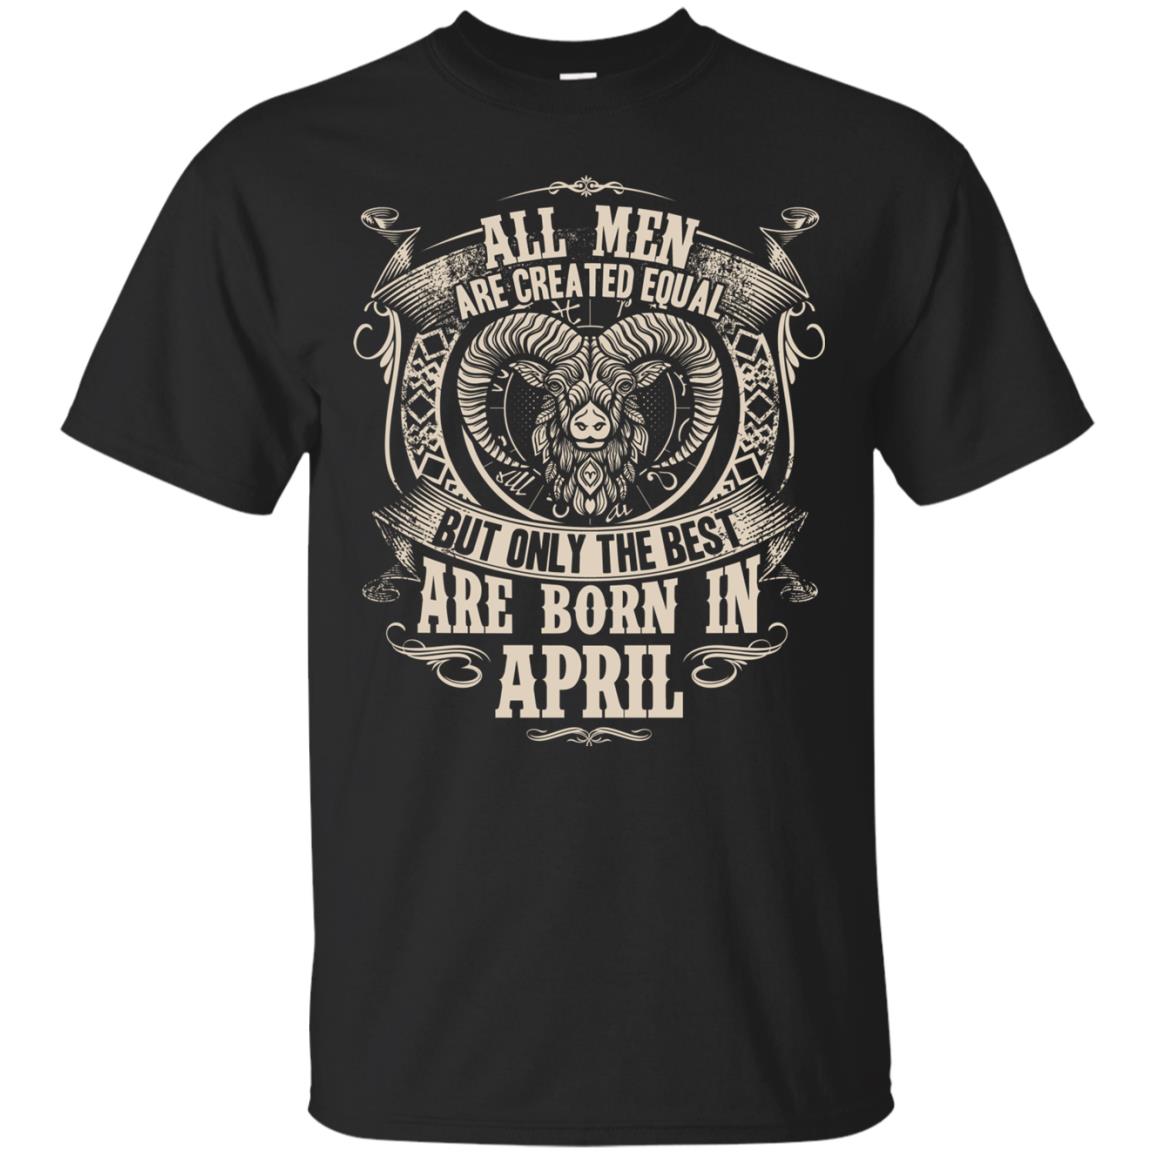 All Men Are Created Equal, But Only The Best Are Born In April T-shirtG200 Gildan Ultra Cotton T-Shirt